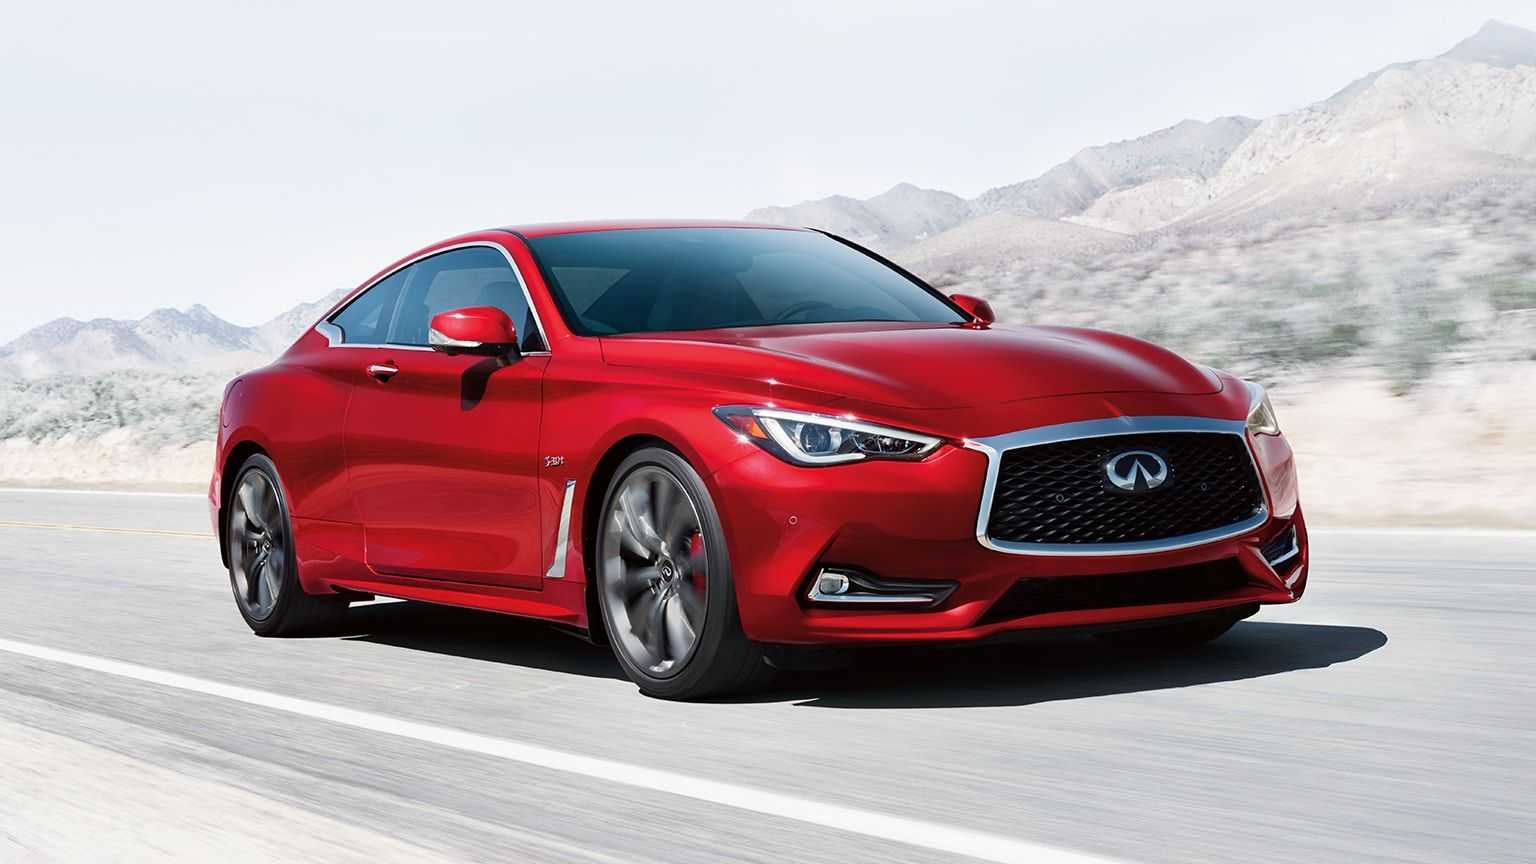 2020 Infiniti Q60 Coupe Featured